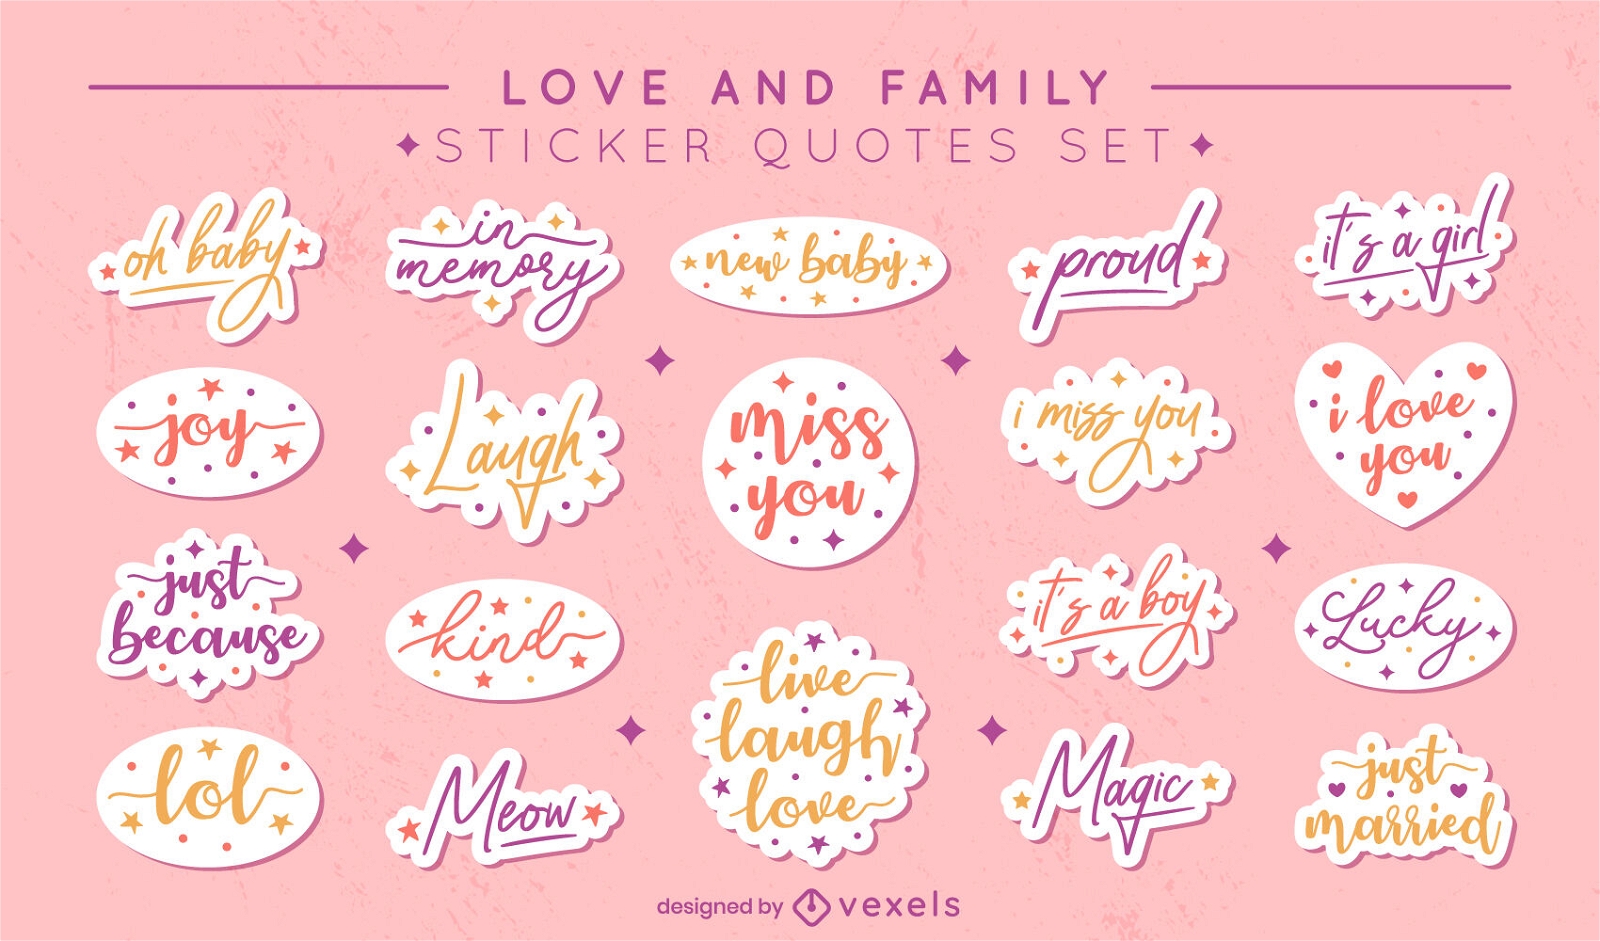 Love and family sticker quotes lettering set